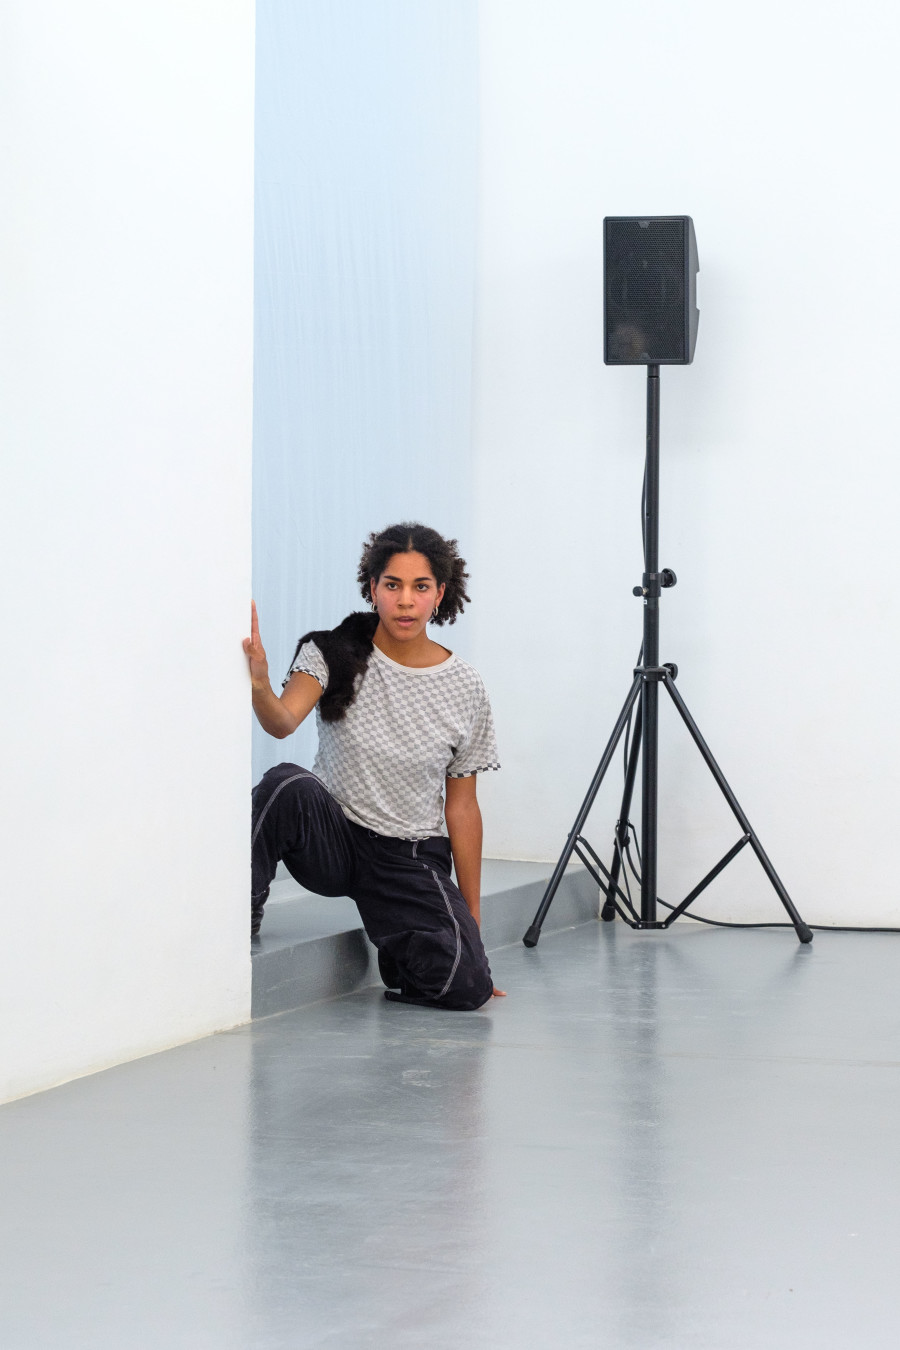 Interstices, performances, Juliette Uzor w/ Axelle Stiefel, (ah ah ah) (CAN). CAN Centre d’art Neuchâtel, 2024. Photography: Sebastian Verdon / all images copyright and courtesy of the artists and CAN Centre d’art Neuchâtel.